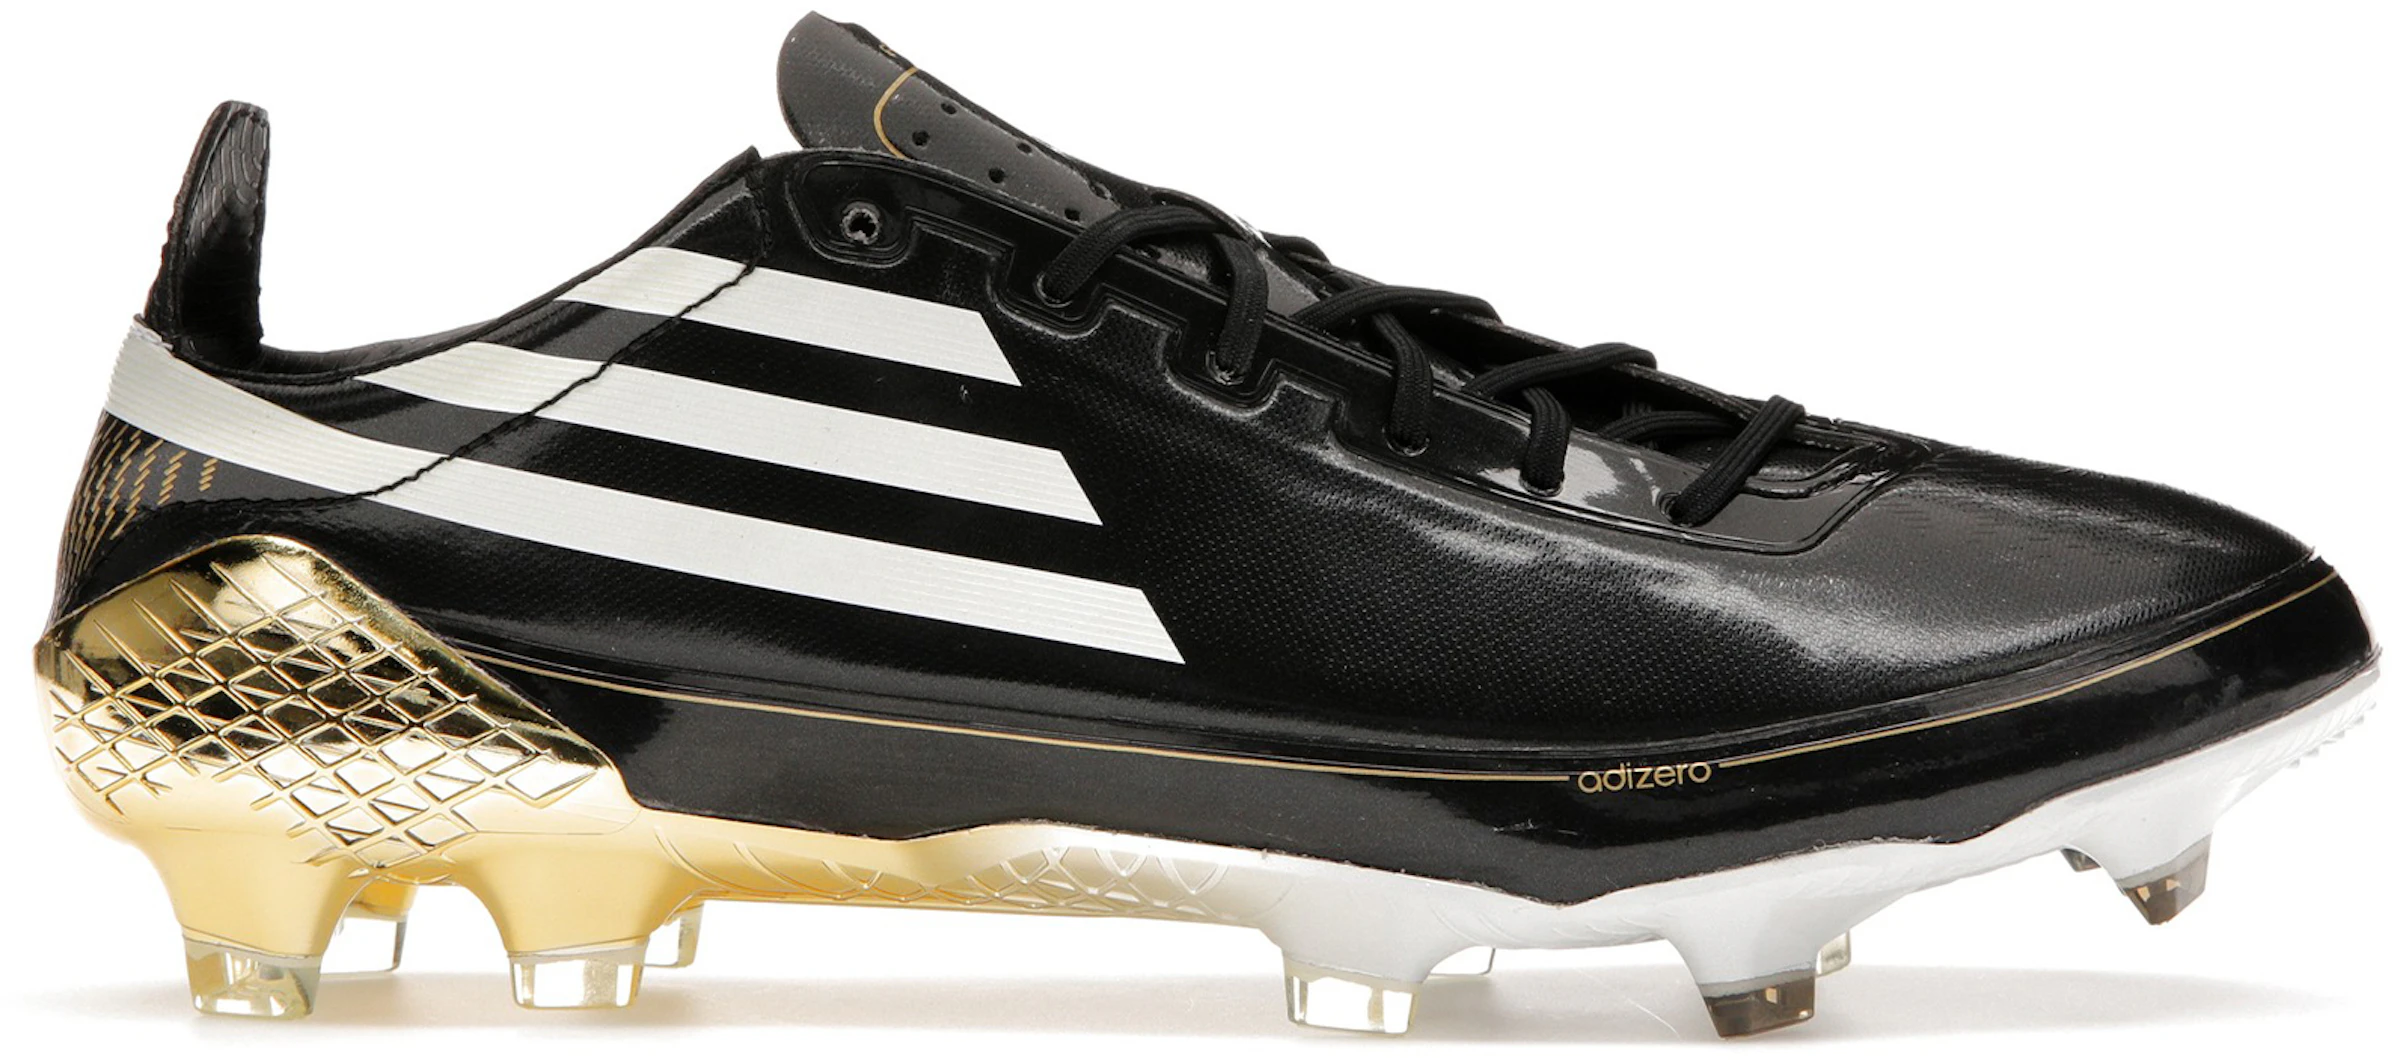 adidas F50 Ghosted FG Legends Pack - GX0220 - US